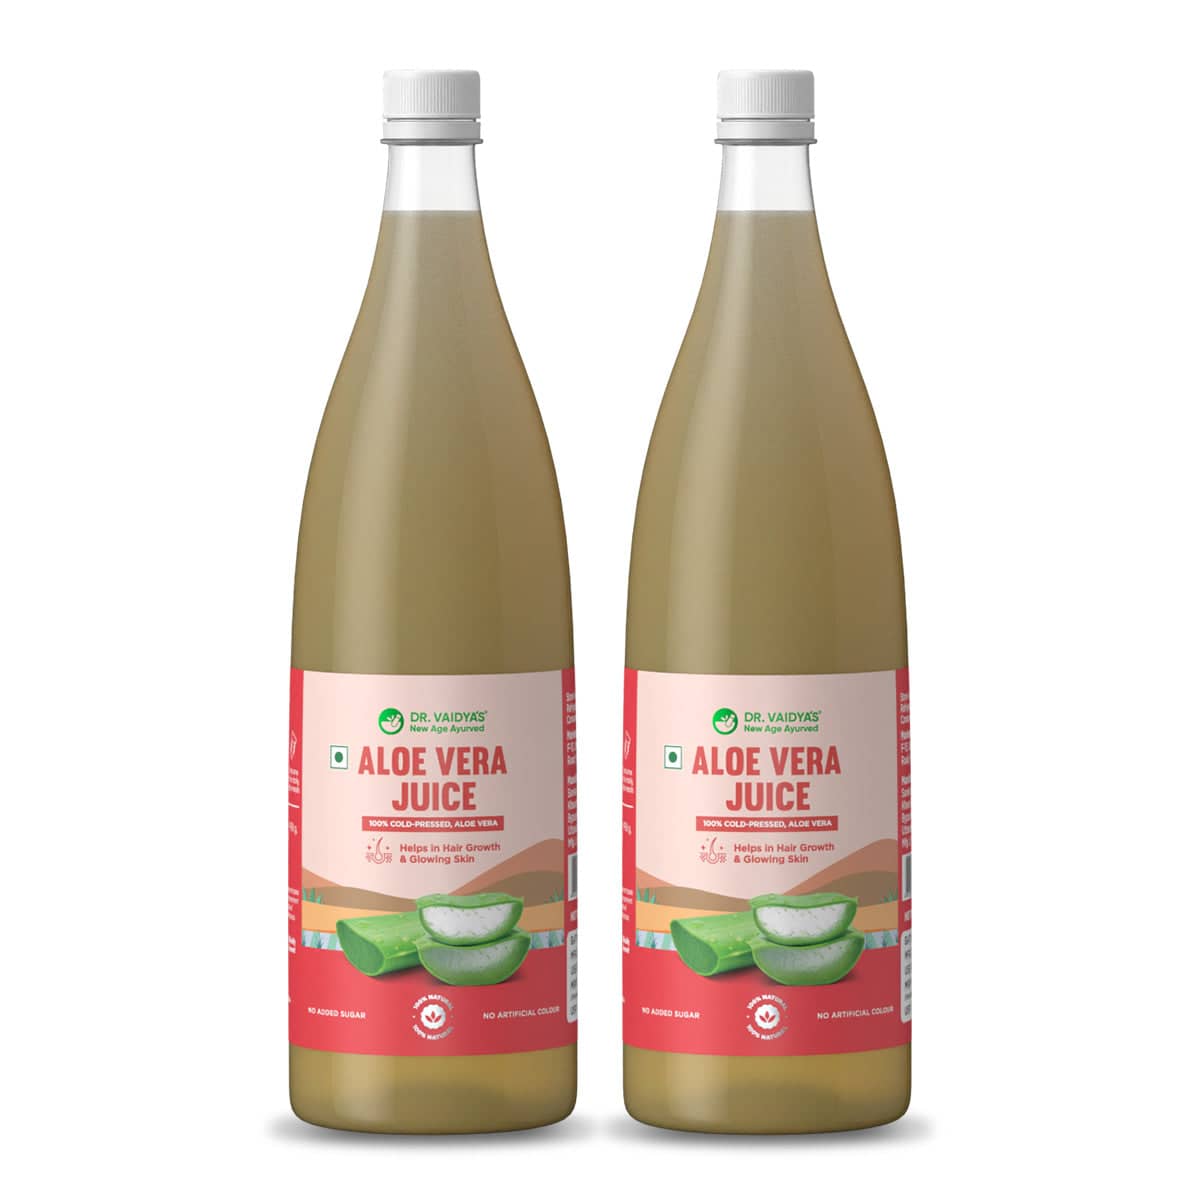 Aloe Vera Juice: For healthy hair & skin, improved immunity and digestion